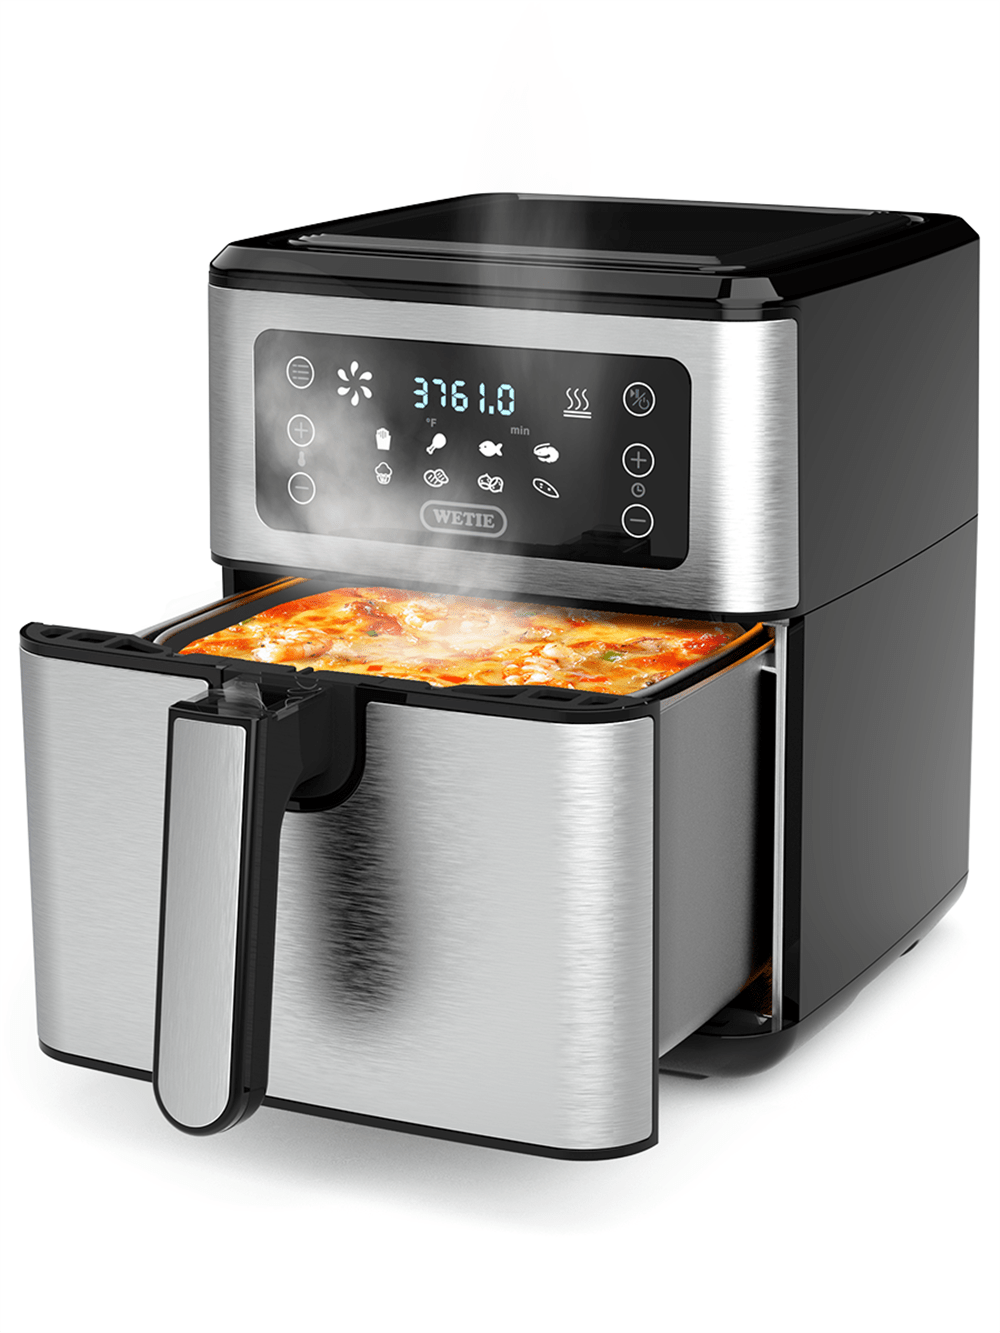 WETIE AF71 1700W 5.8QT Air Fryers Digital Touch Screen with 8 Preset Recipes Oven Cooker Over Heat Protection Cooking Fryers